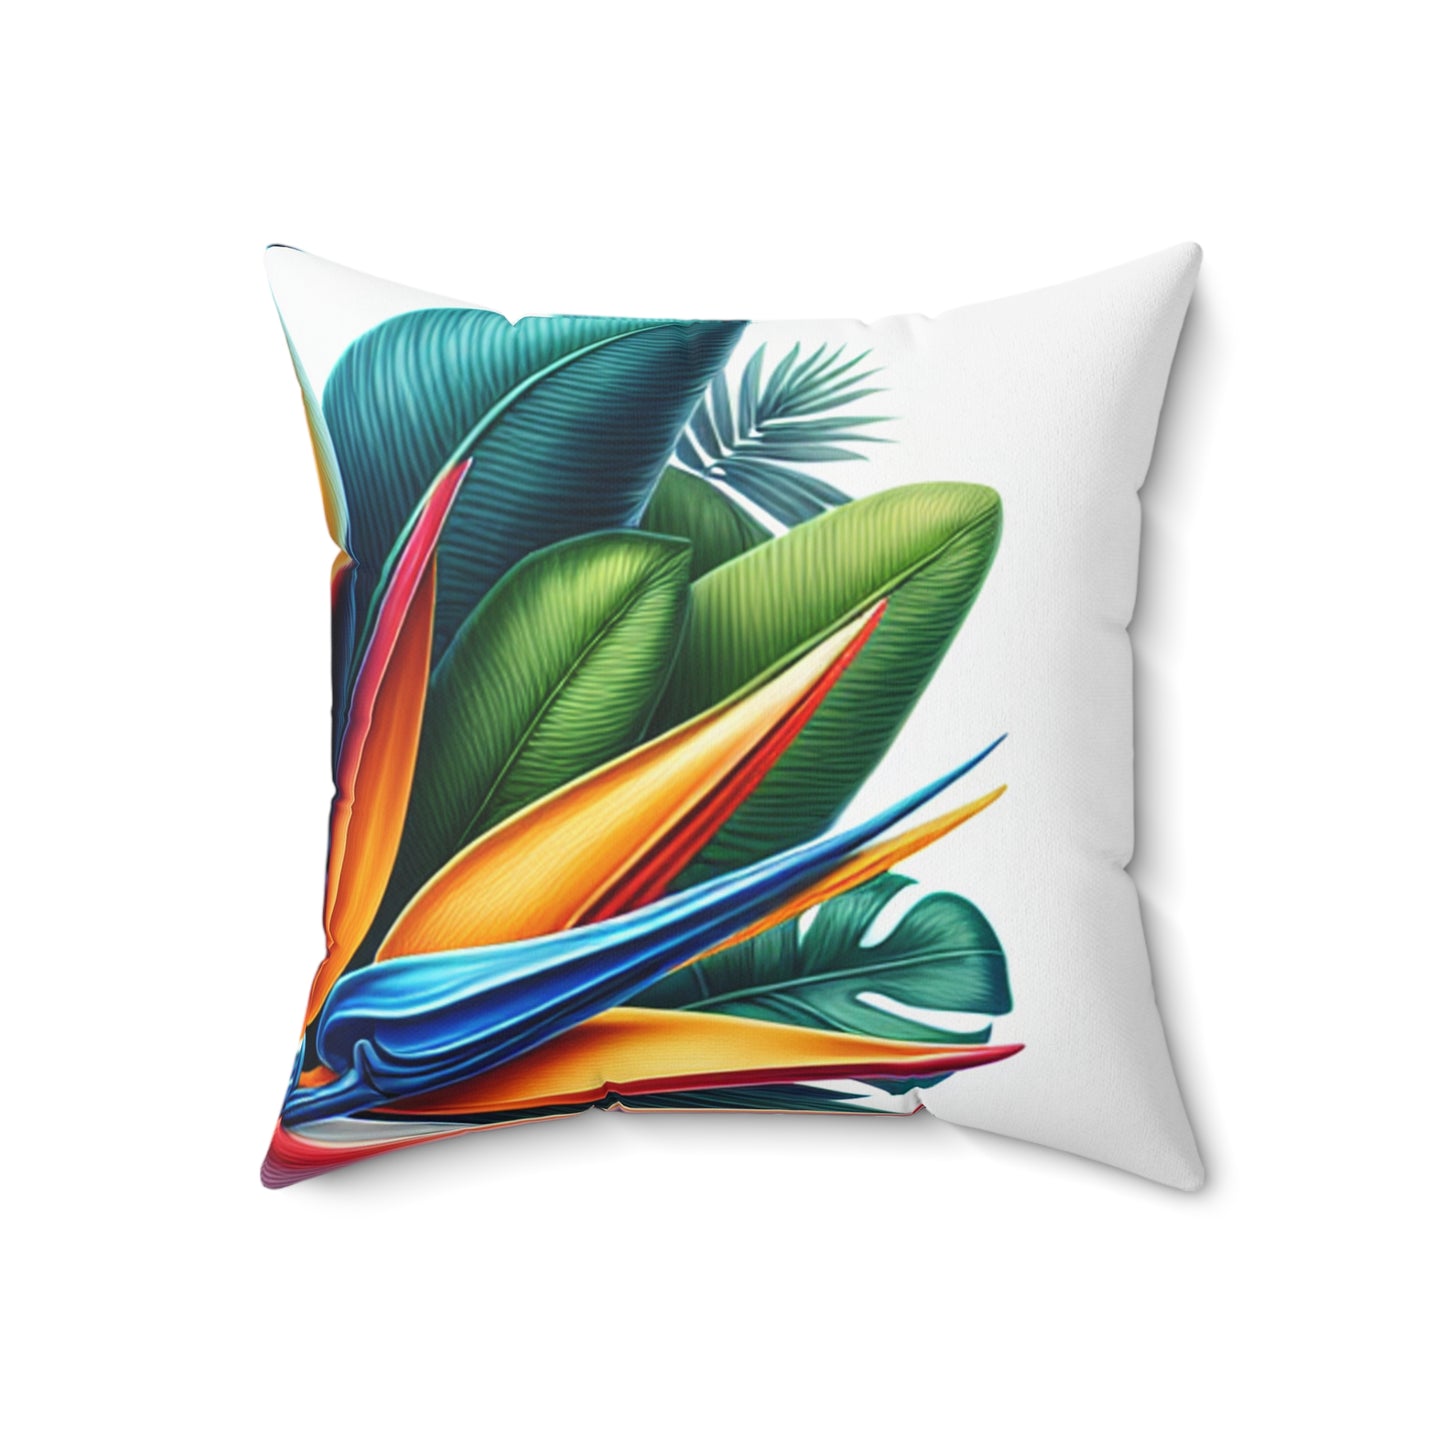 "Toucan on a Tropical Bloom" - The Alien Spun Polyester Square Pillow Hyperrealism Style